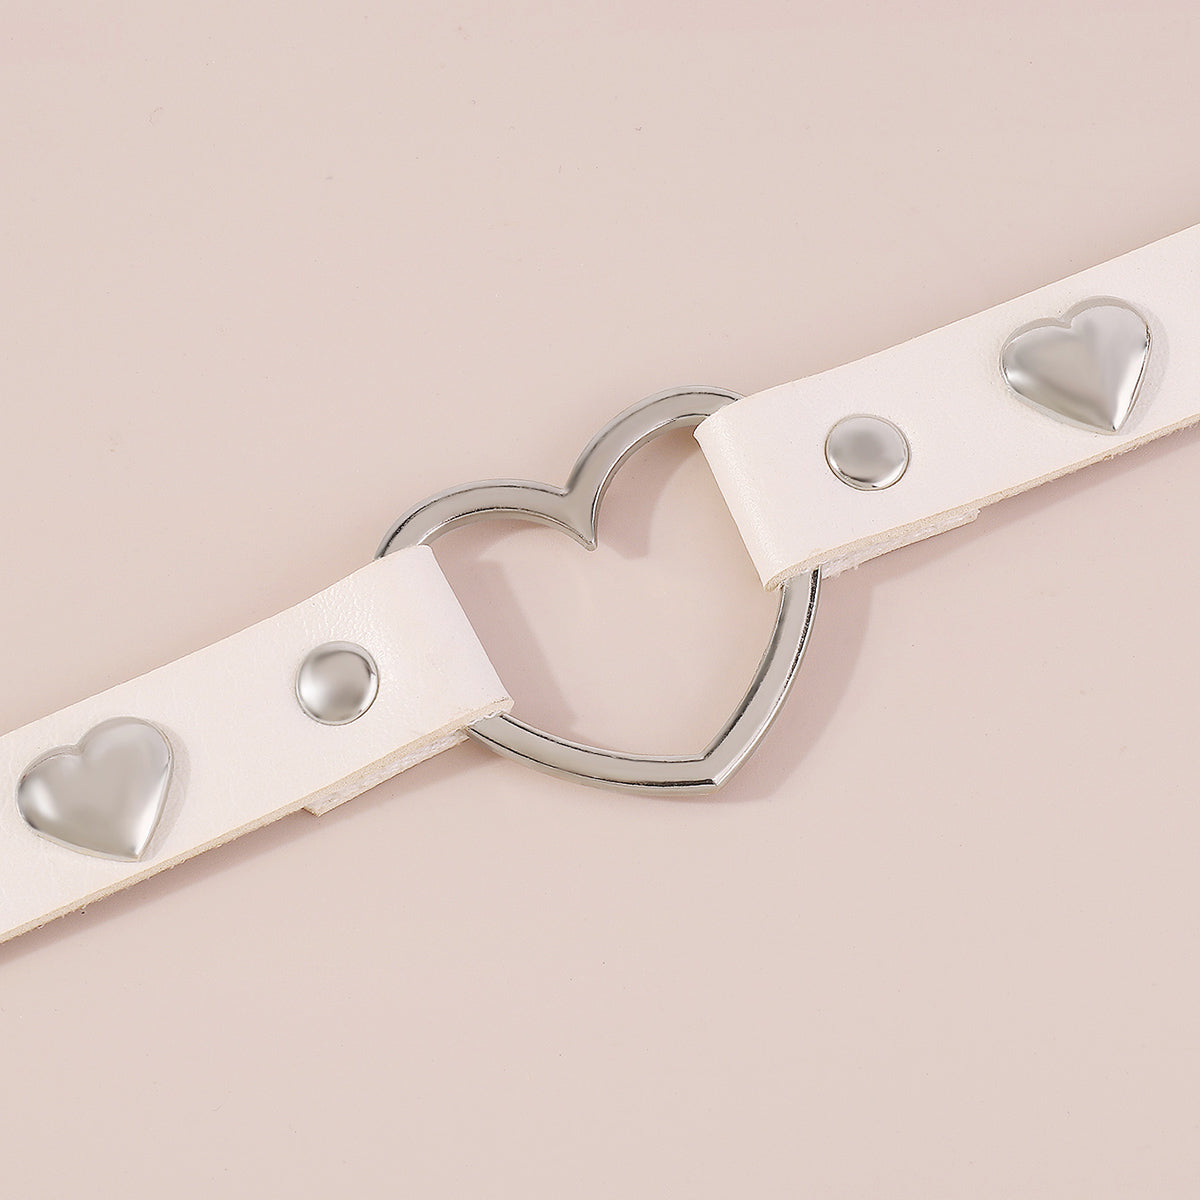 White Polystyrene & Silver-Plated Heart Choker Necklace